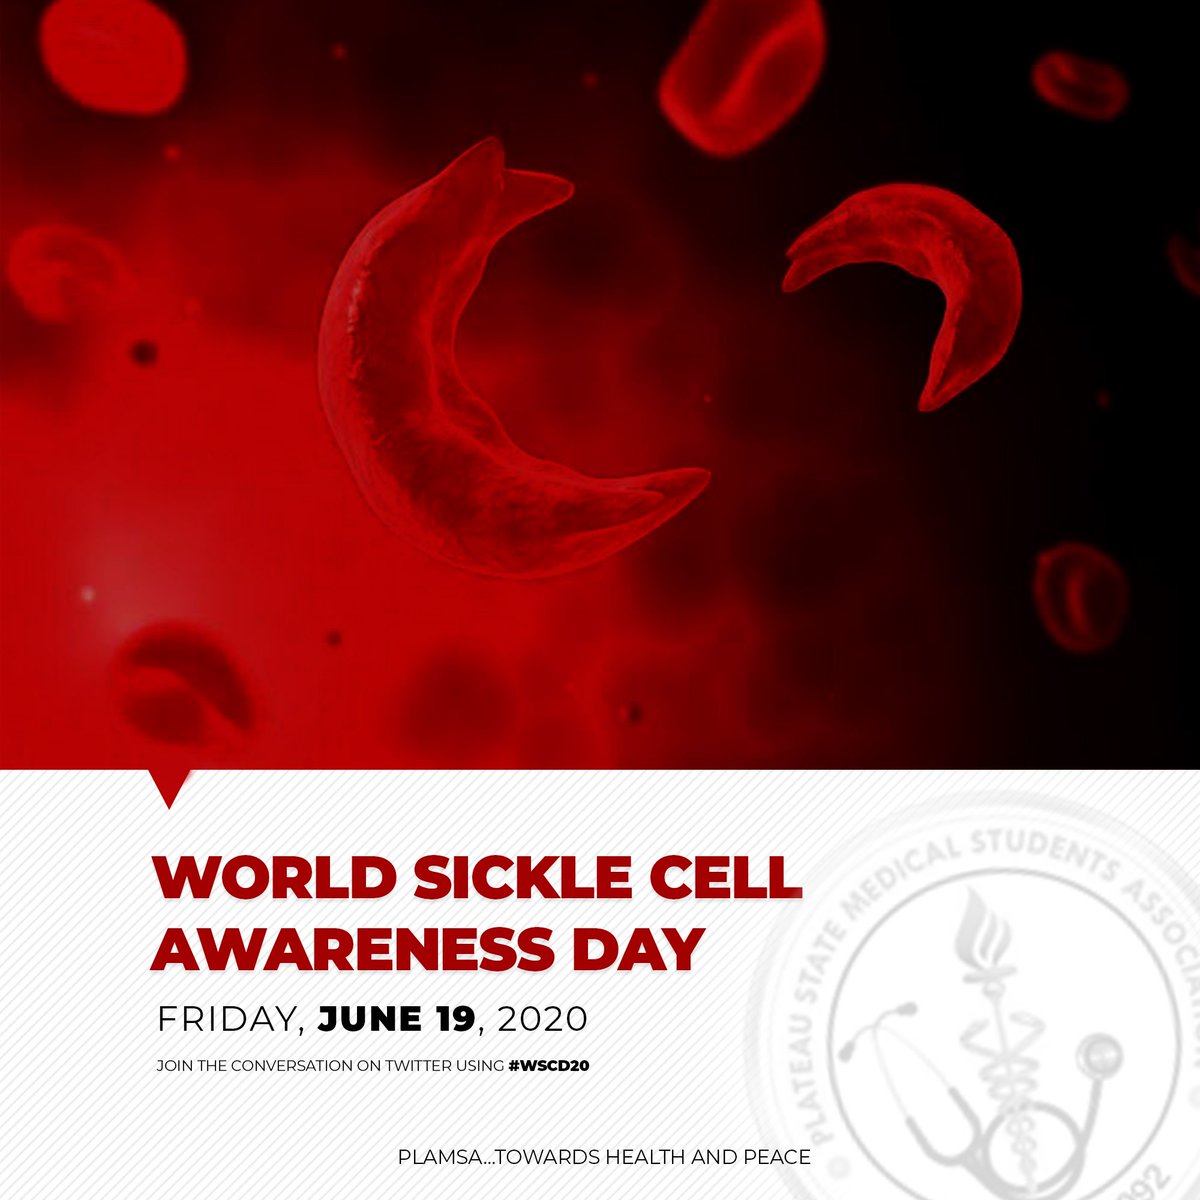 Still in the spirit of the #WorldSickleCellDay2020 
It is expedient that we all know our genotypes for the good of the society and world at large.
#genotypebeforelove
#KnowYourGenotype 
#WorldSickleCellDay